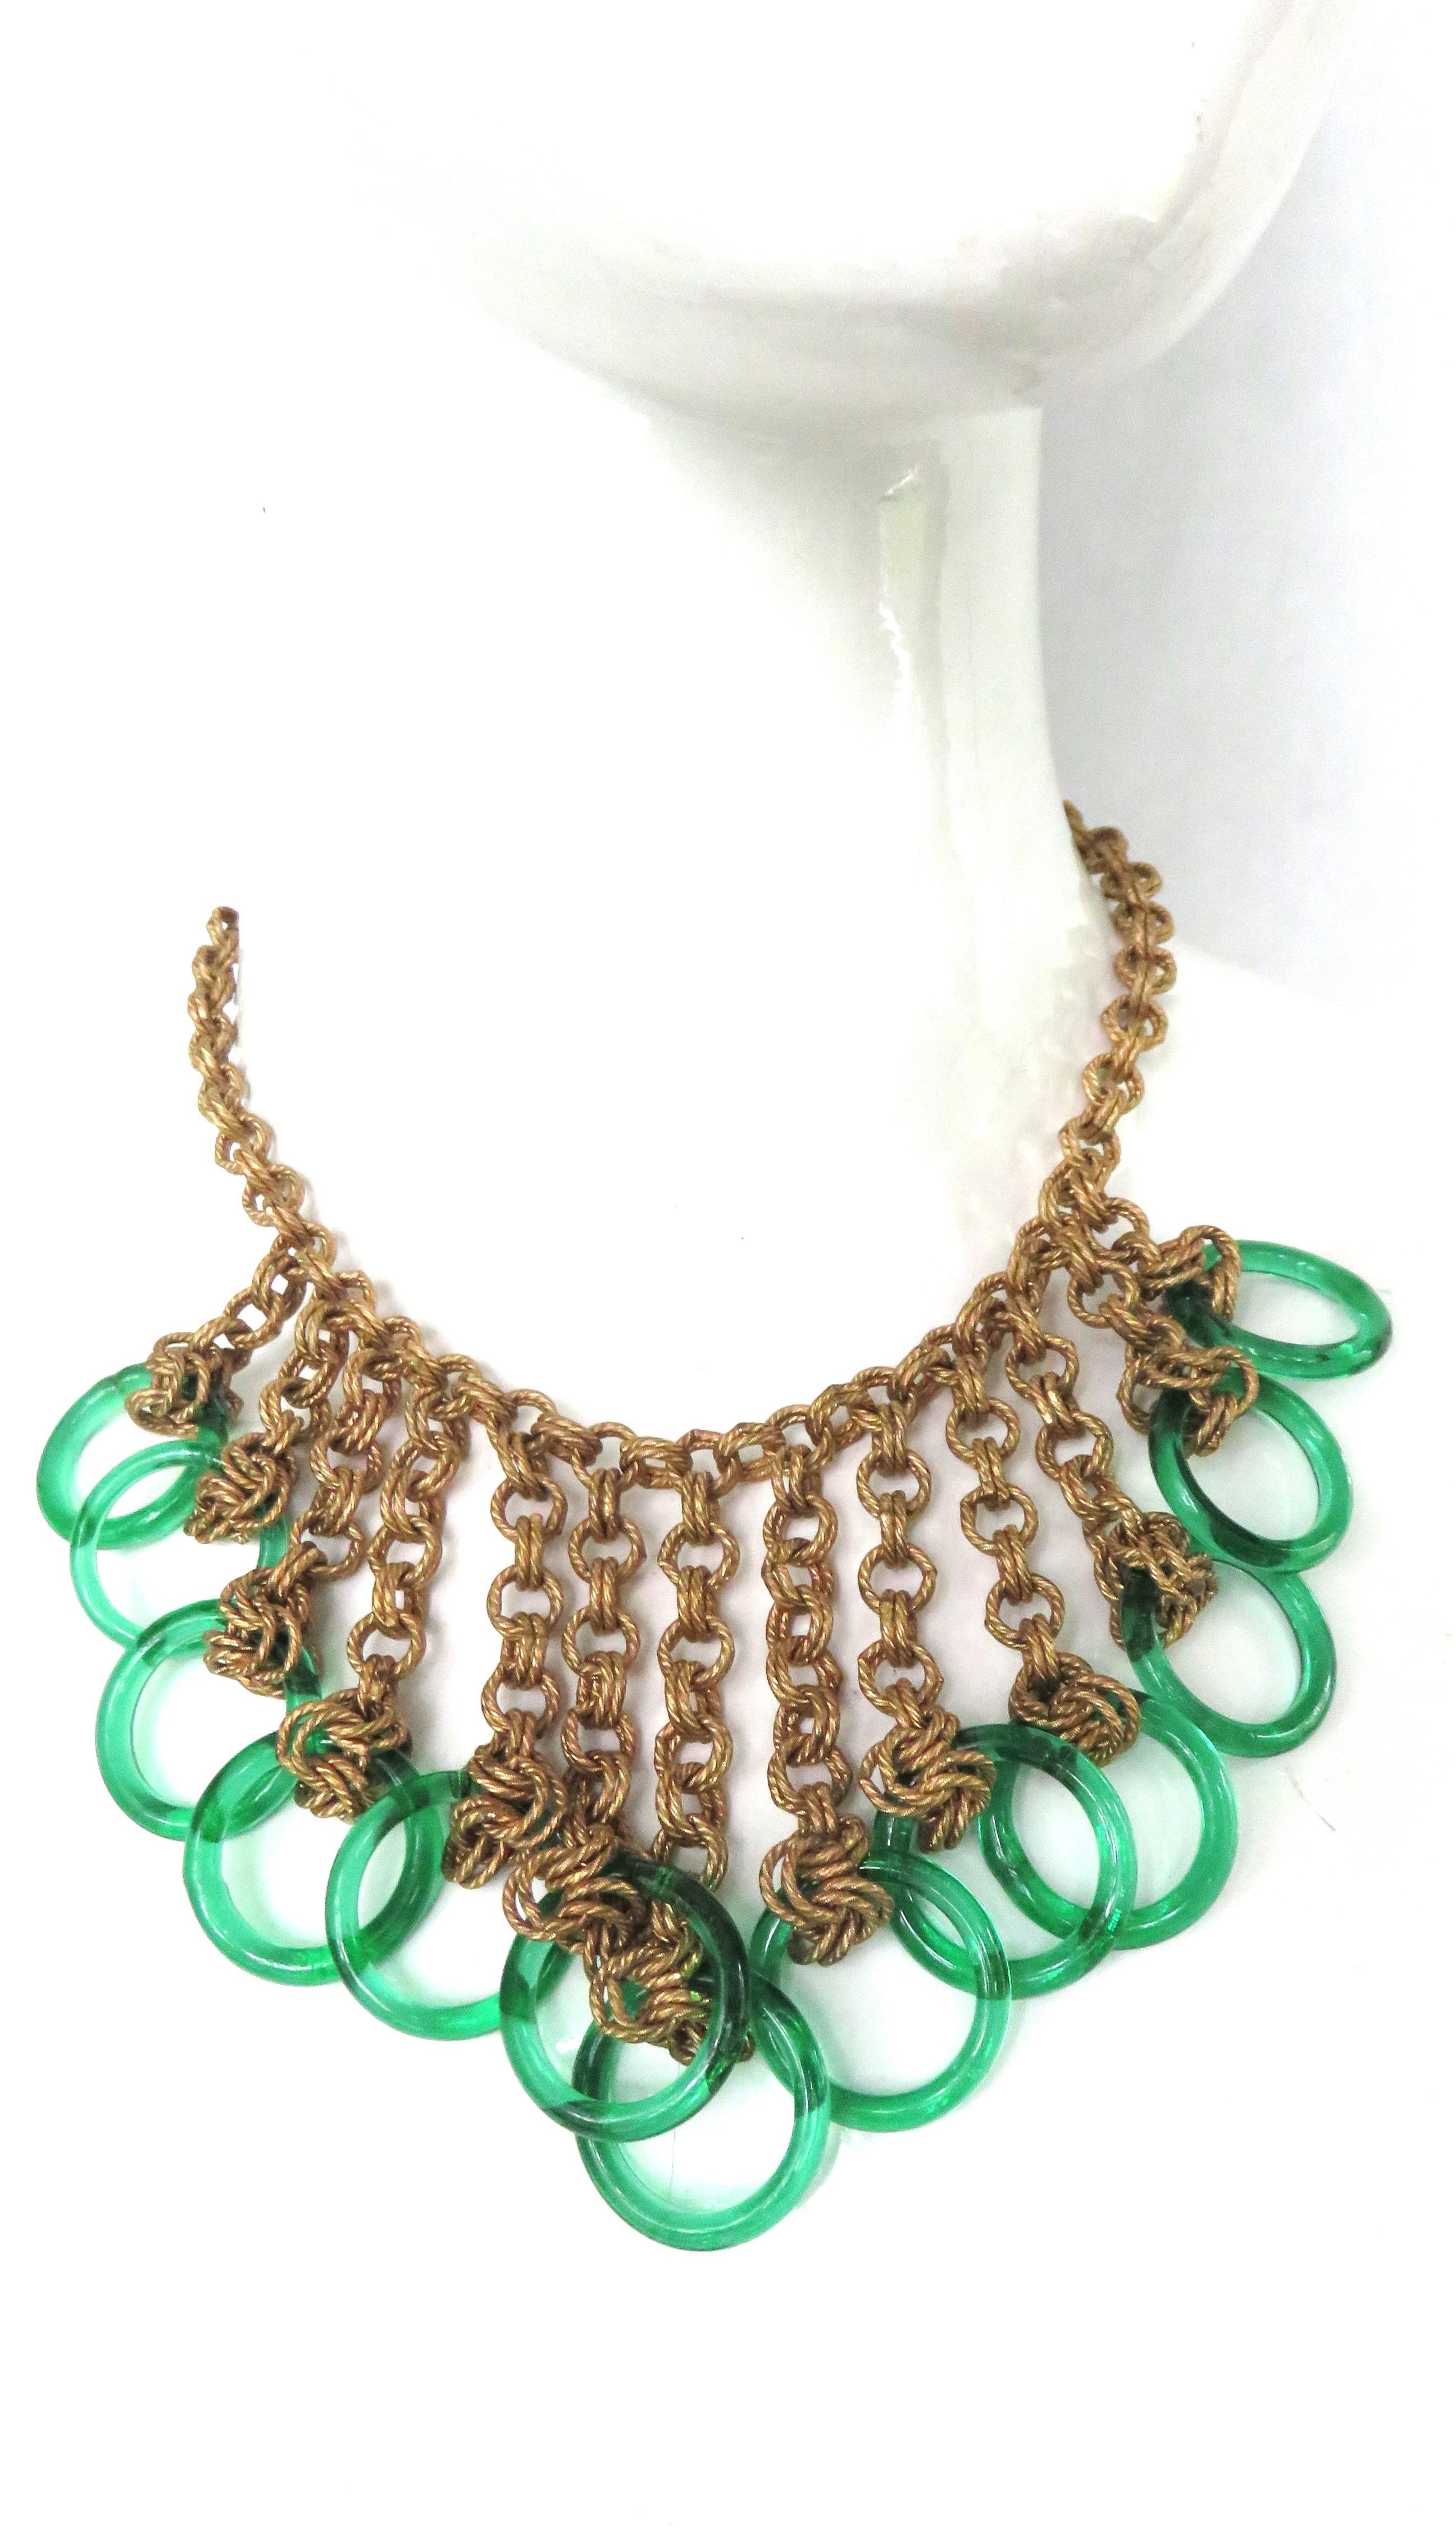 Chain Bib 1940s Necklace with Green Glass Circles In Good Condition For Sale In Water Mill, NY